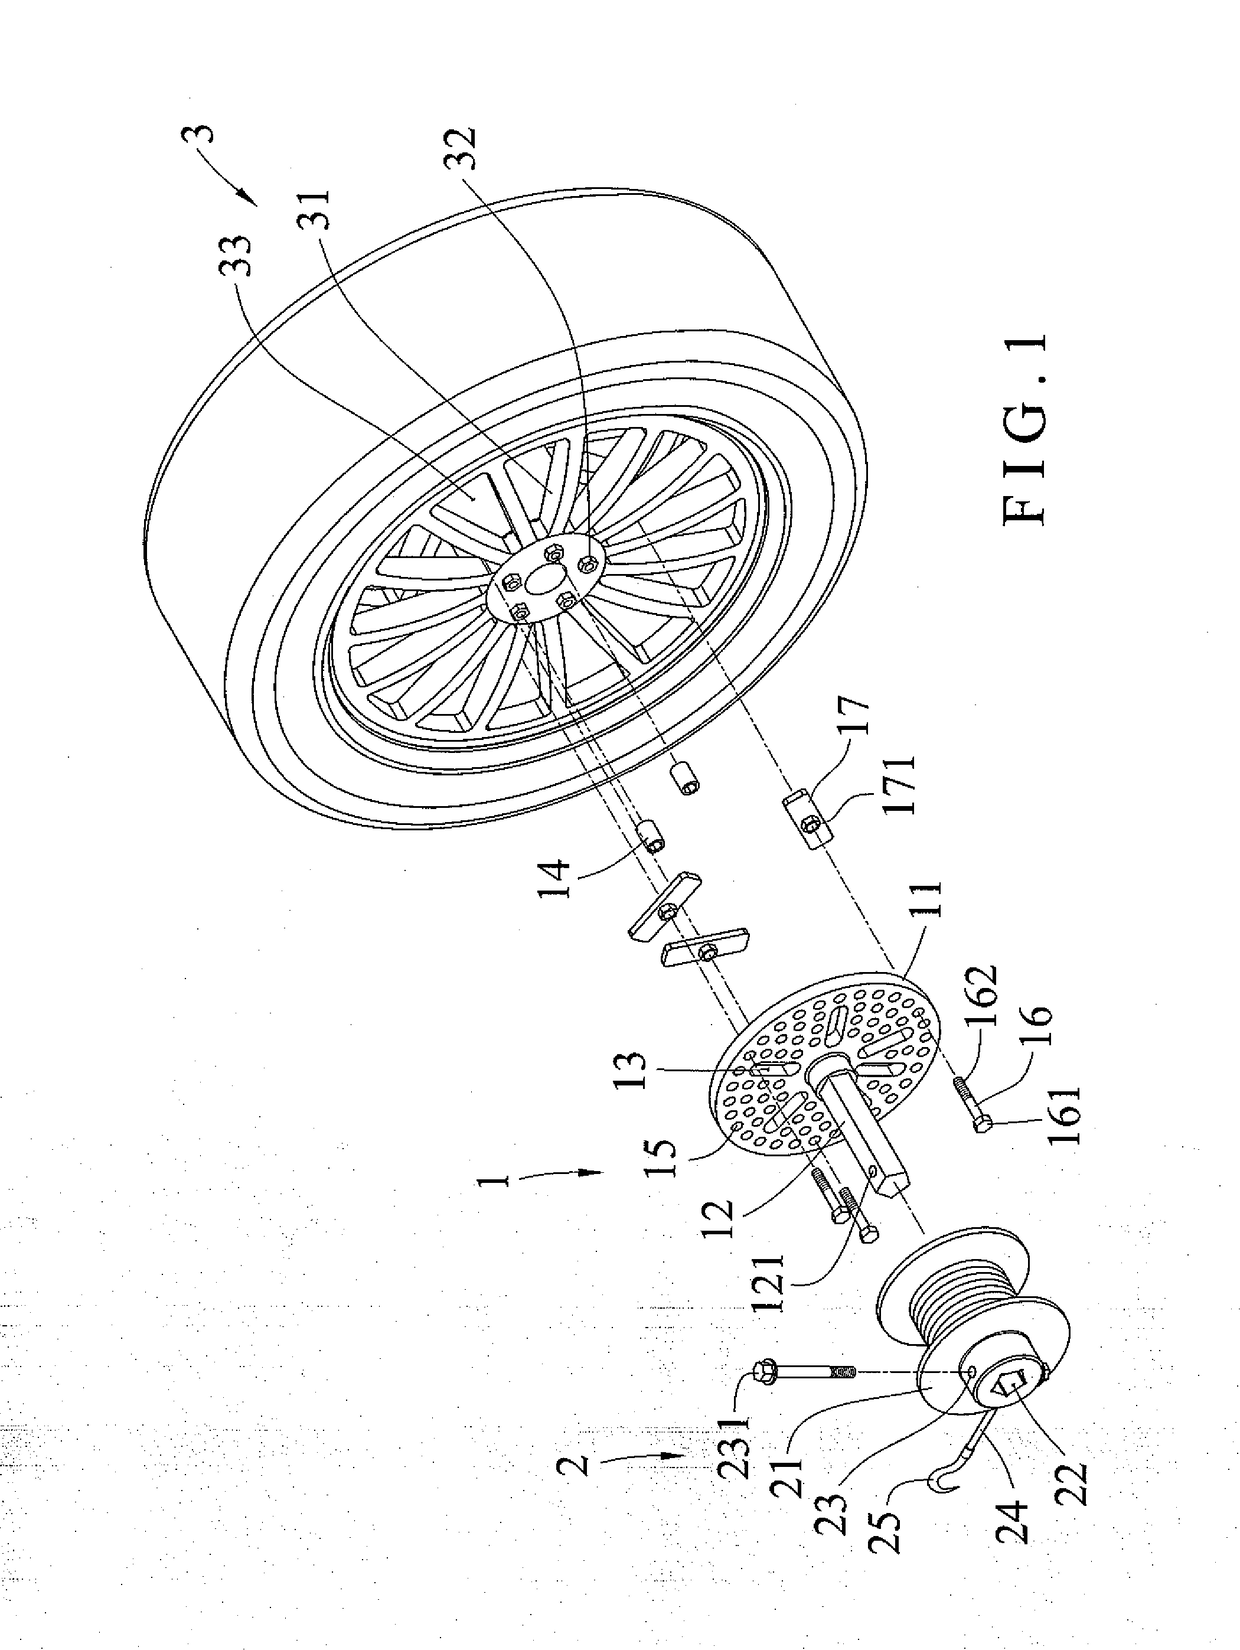 Vehicle Wheel with Self-Rescue Apparatus